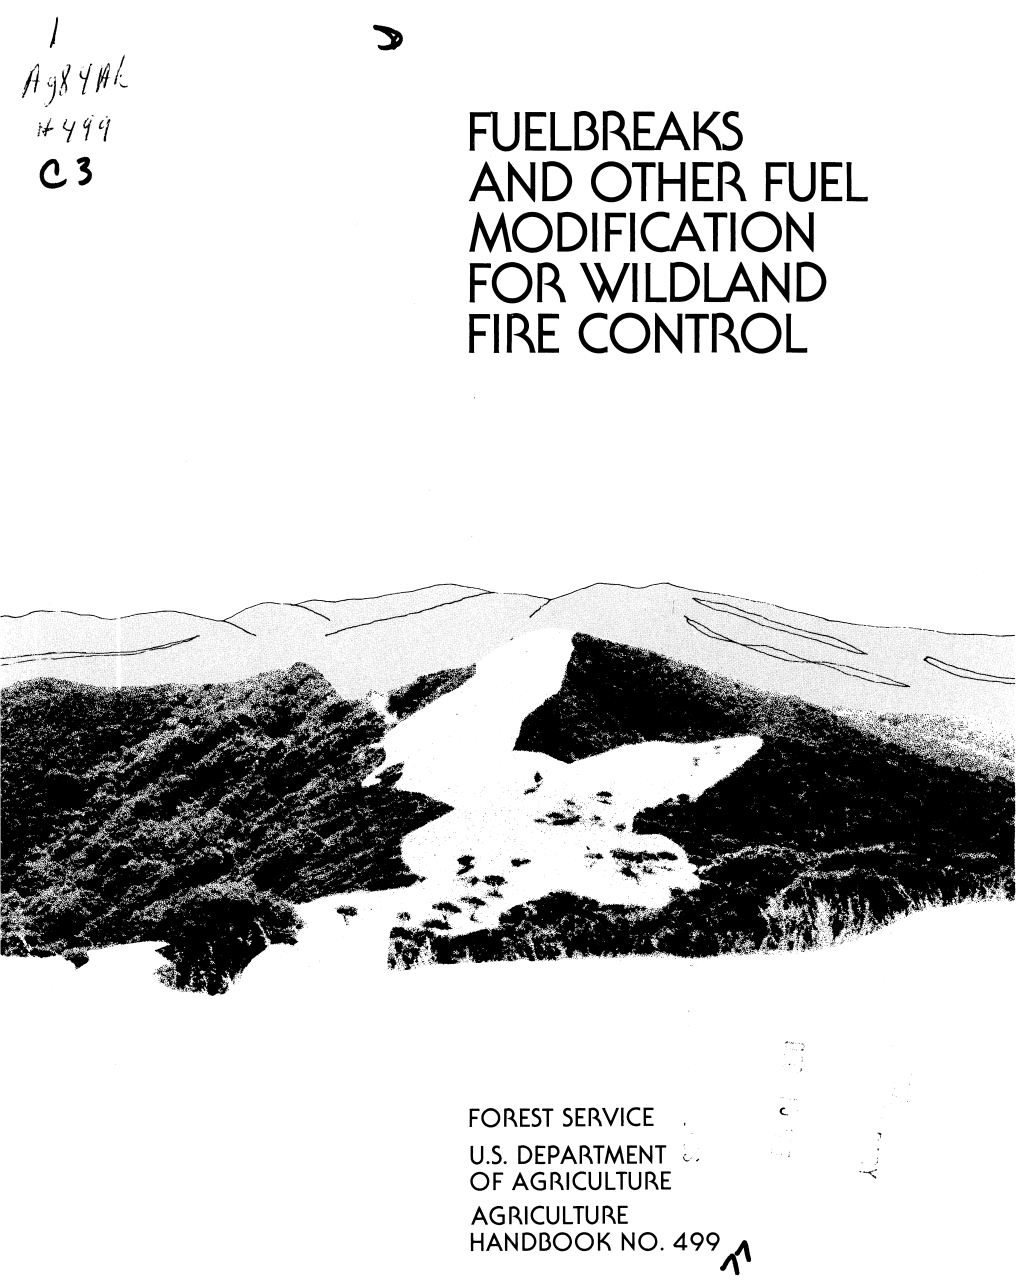 Rjelbreaks and Other Fuel Modification for Wildland